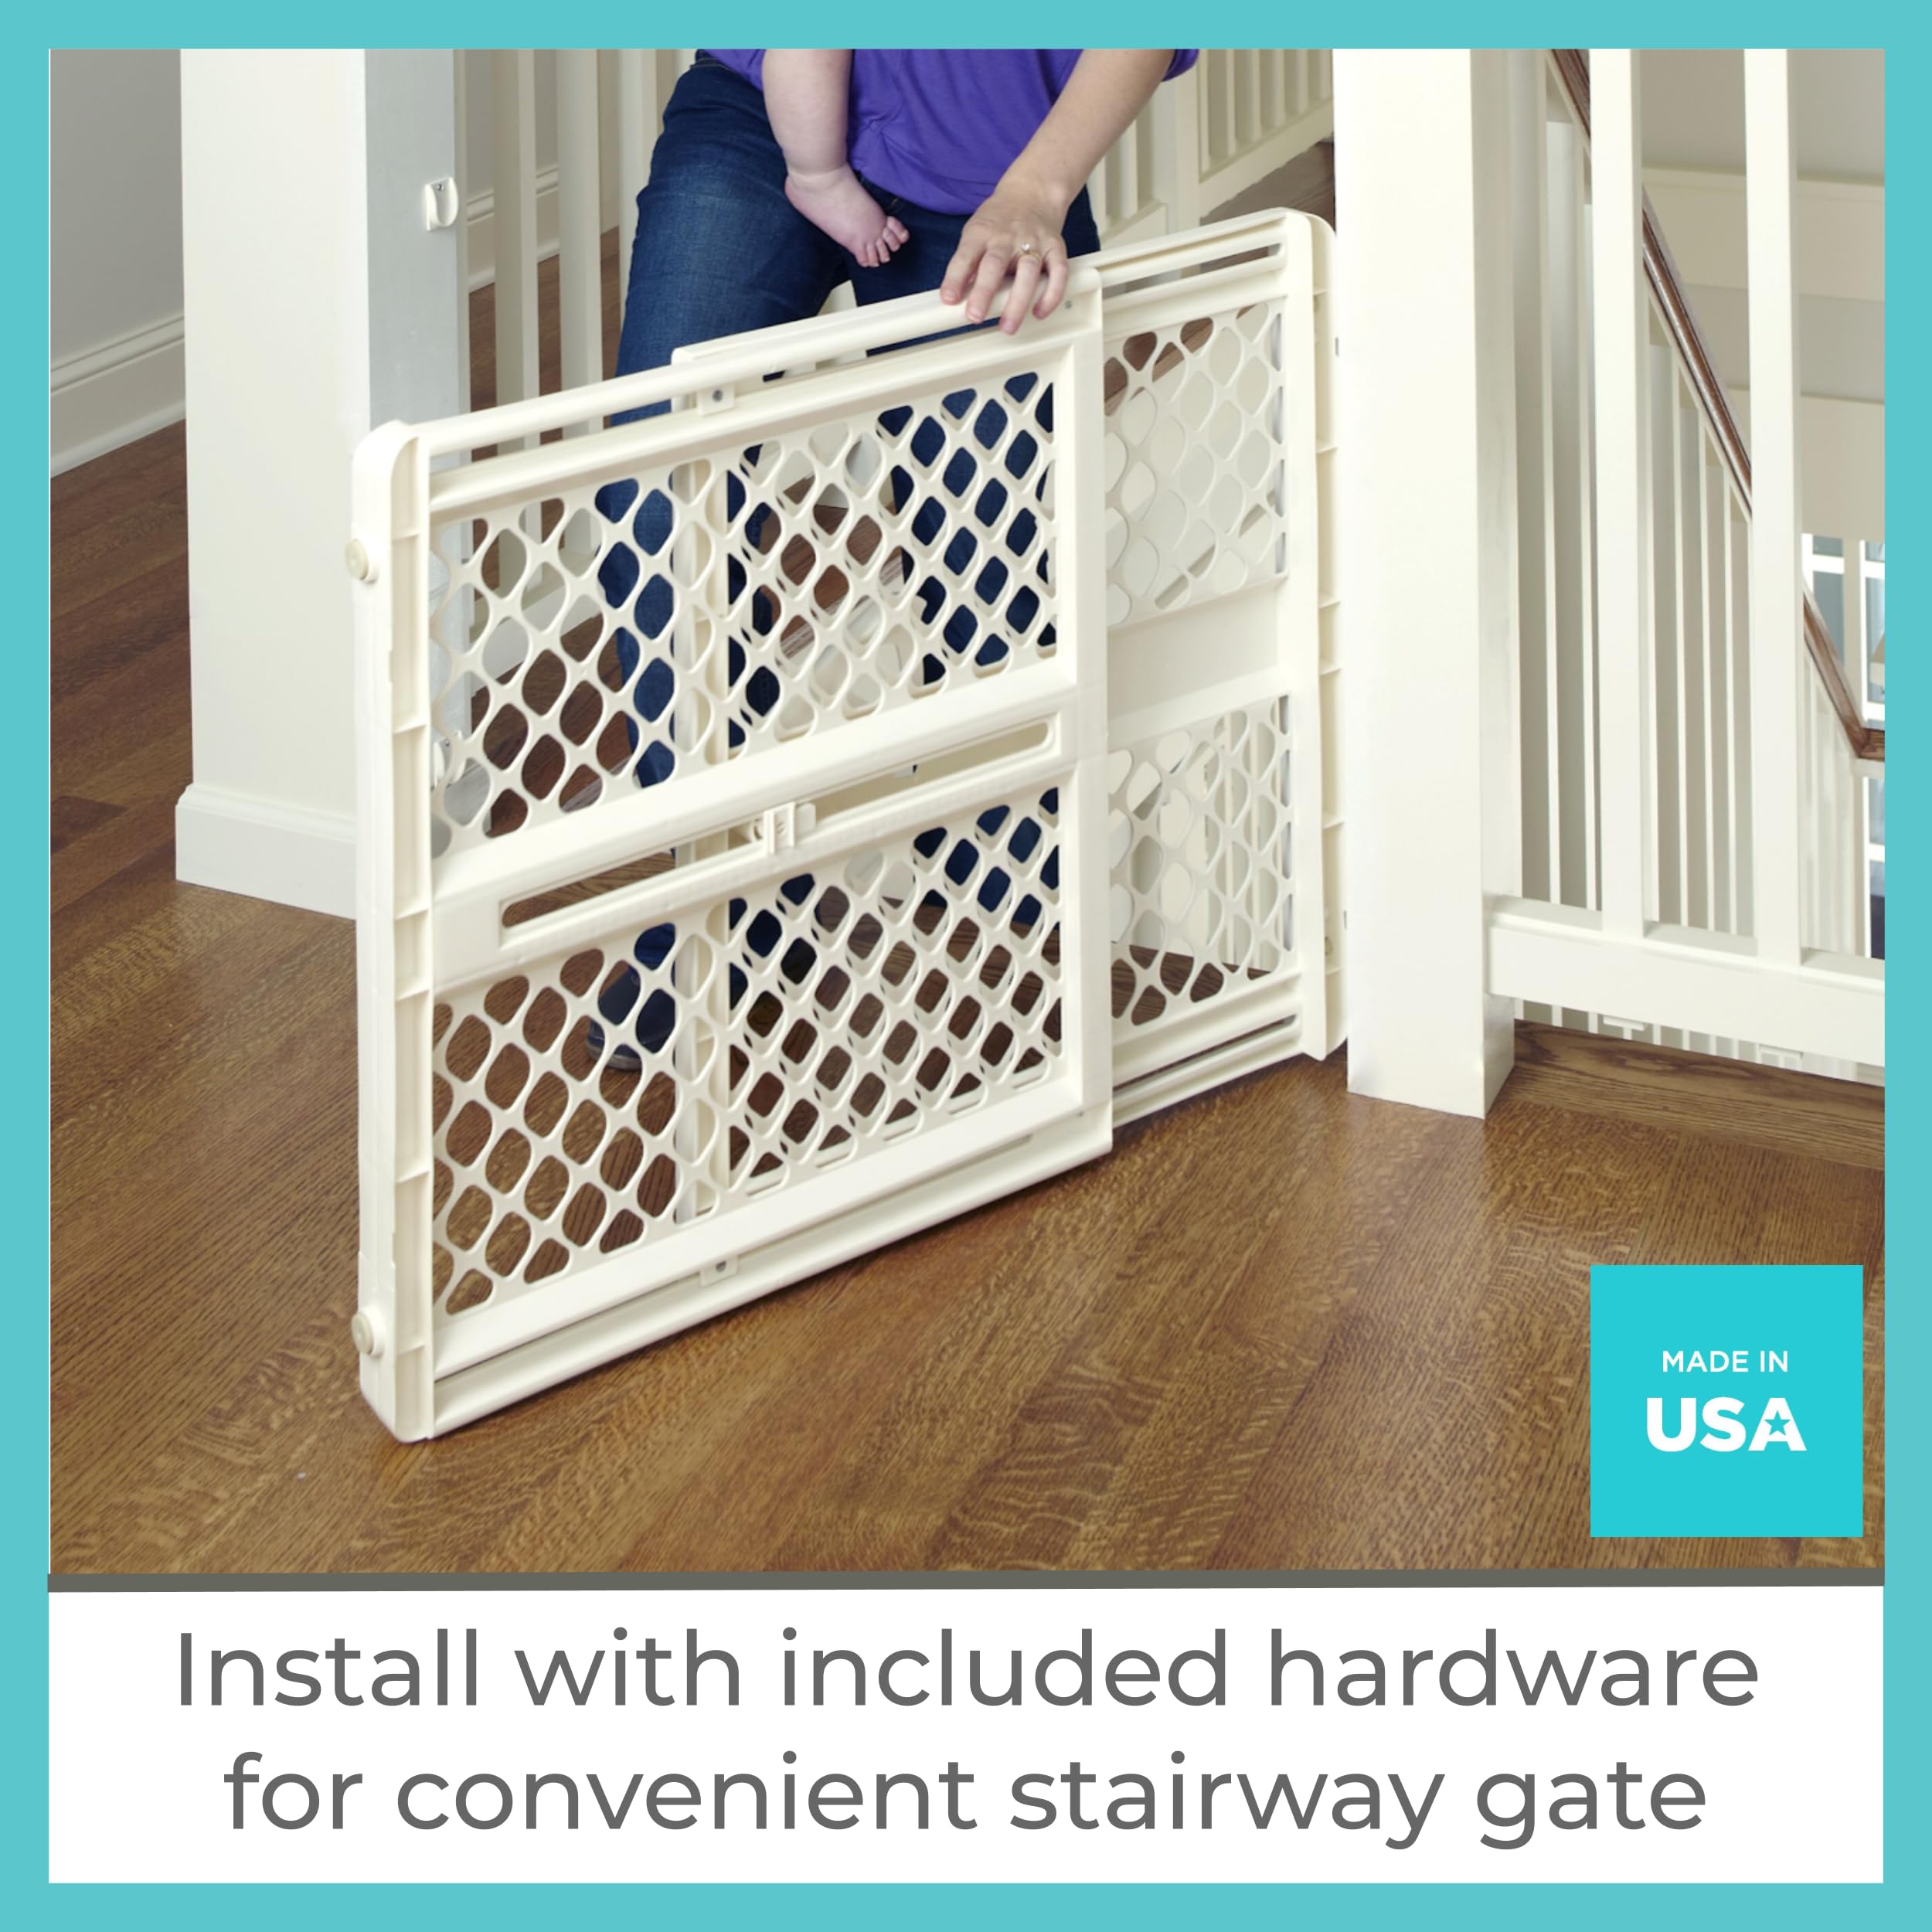 Toddleroo by North States 42” Wide Supergate Ergo Baby Gate, Made in USA: for doorways or stairways. Includes Wall Cups. Pressure or Hardware Mount. 26” - 42” Wide (26